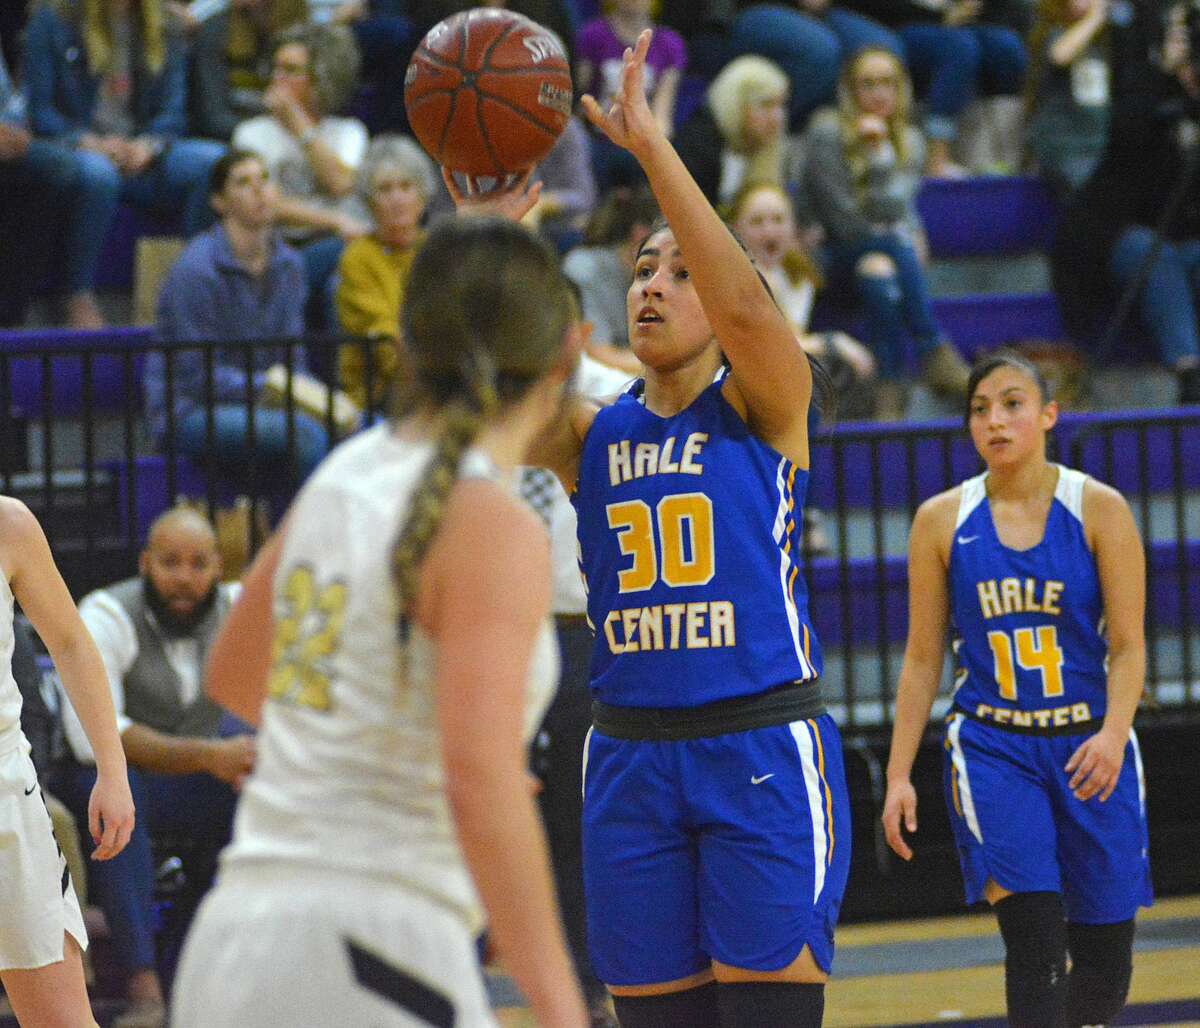 Hale Center’s Emily Rodriguez puts up the shot in the second half of a Class 2A bi-district girls basketball game against Vega on Monday, Feb. 17, 2020 at Canyon High School.